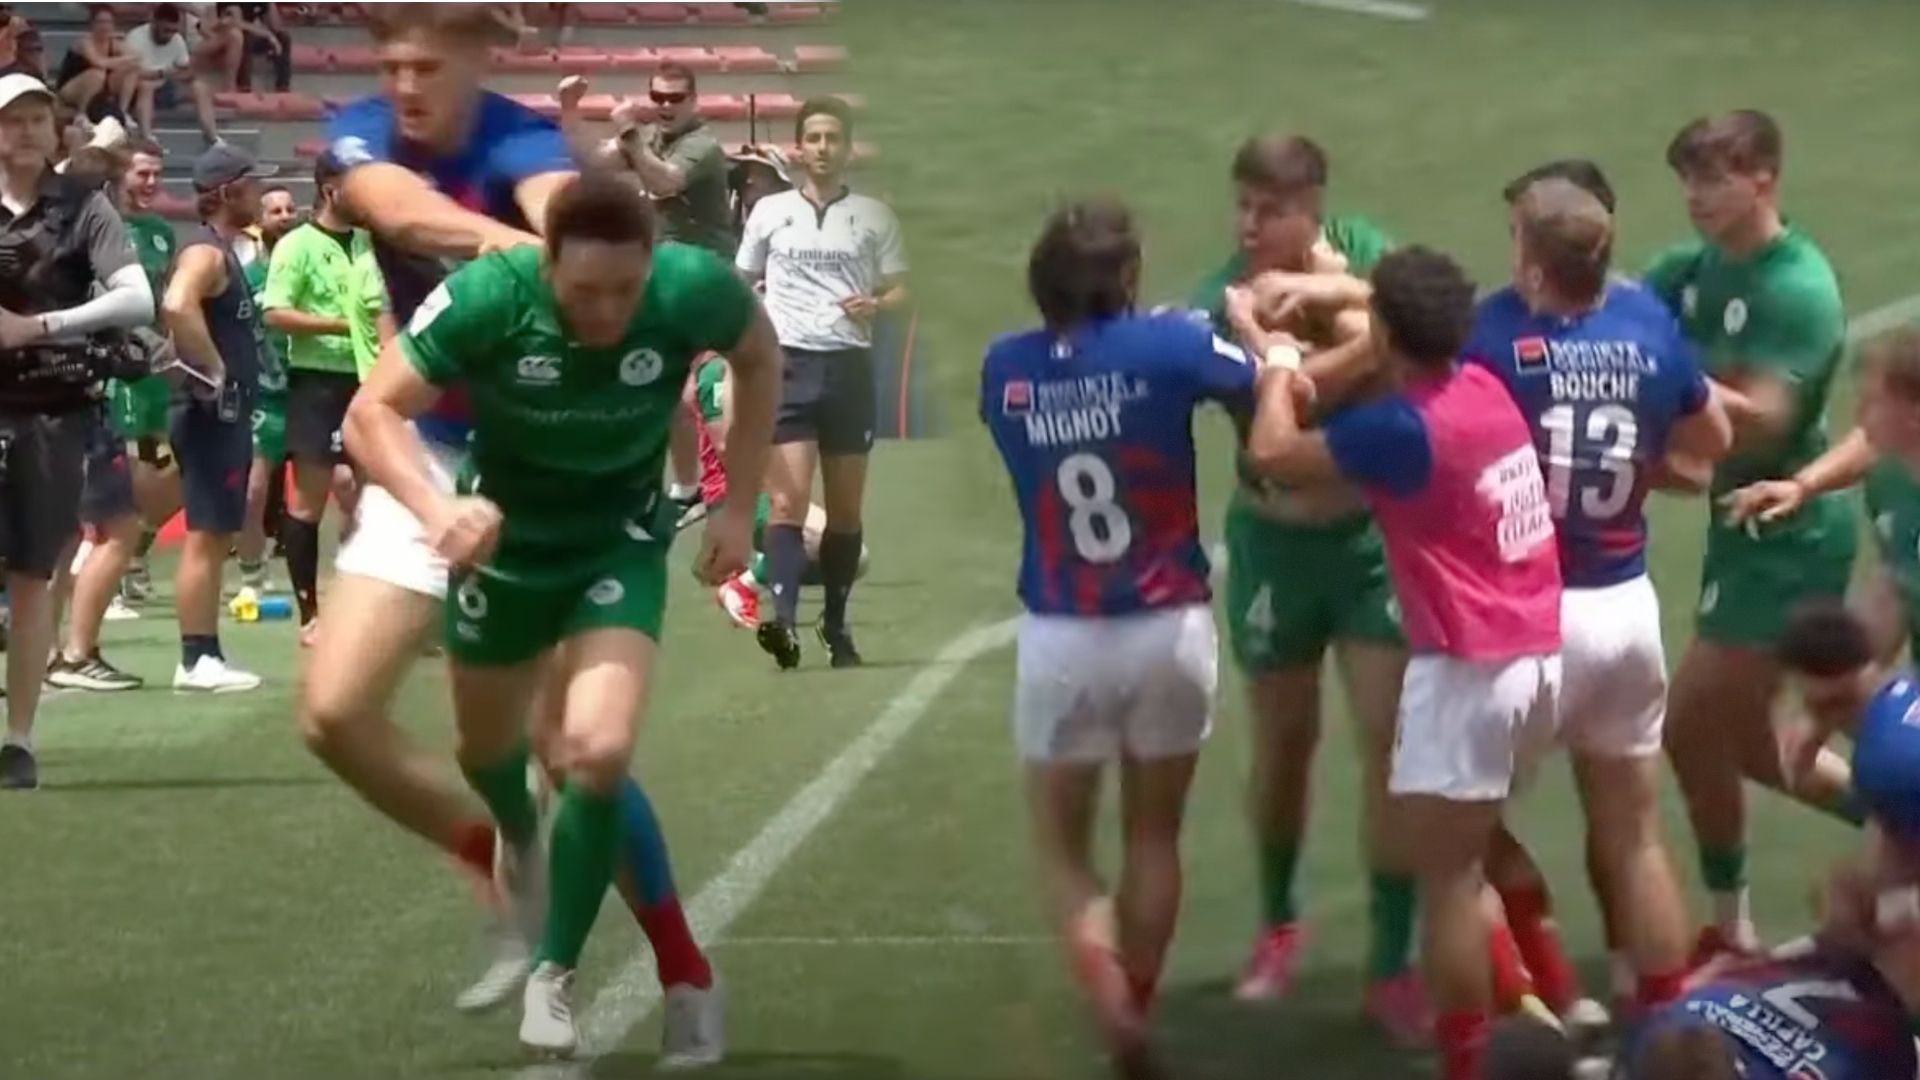 Cheap shot after final whistle in Cup semi-final sparks all out brawl